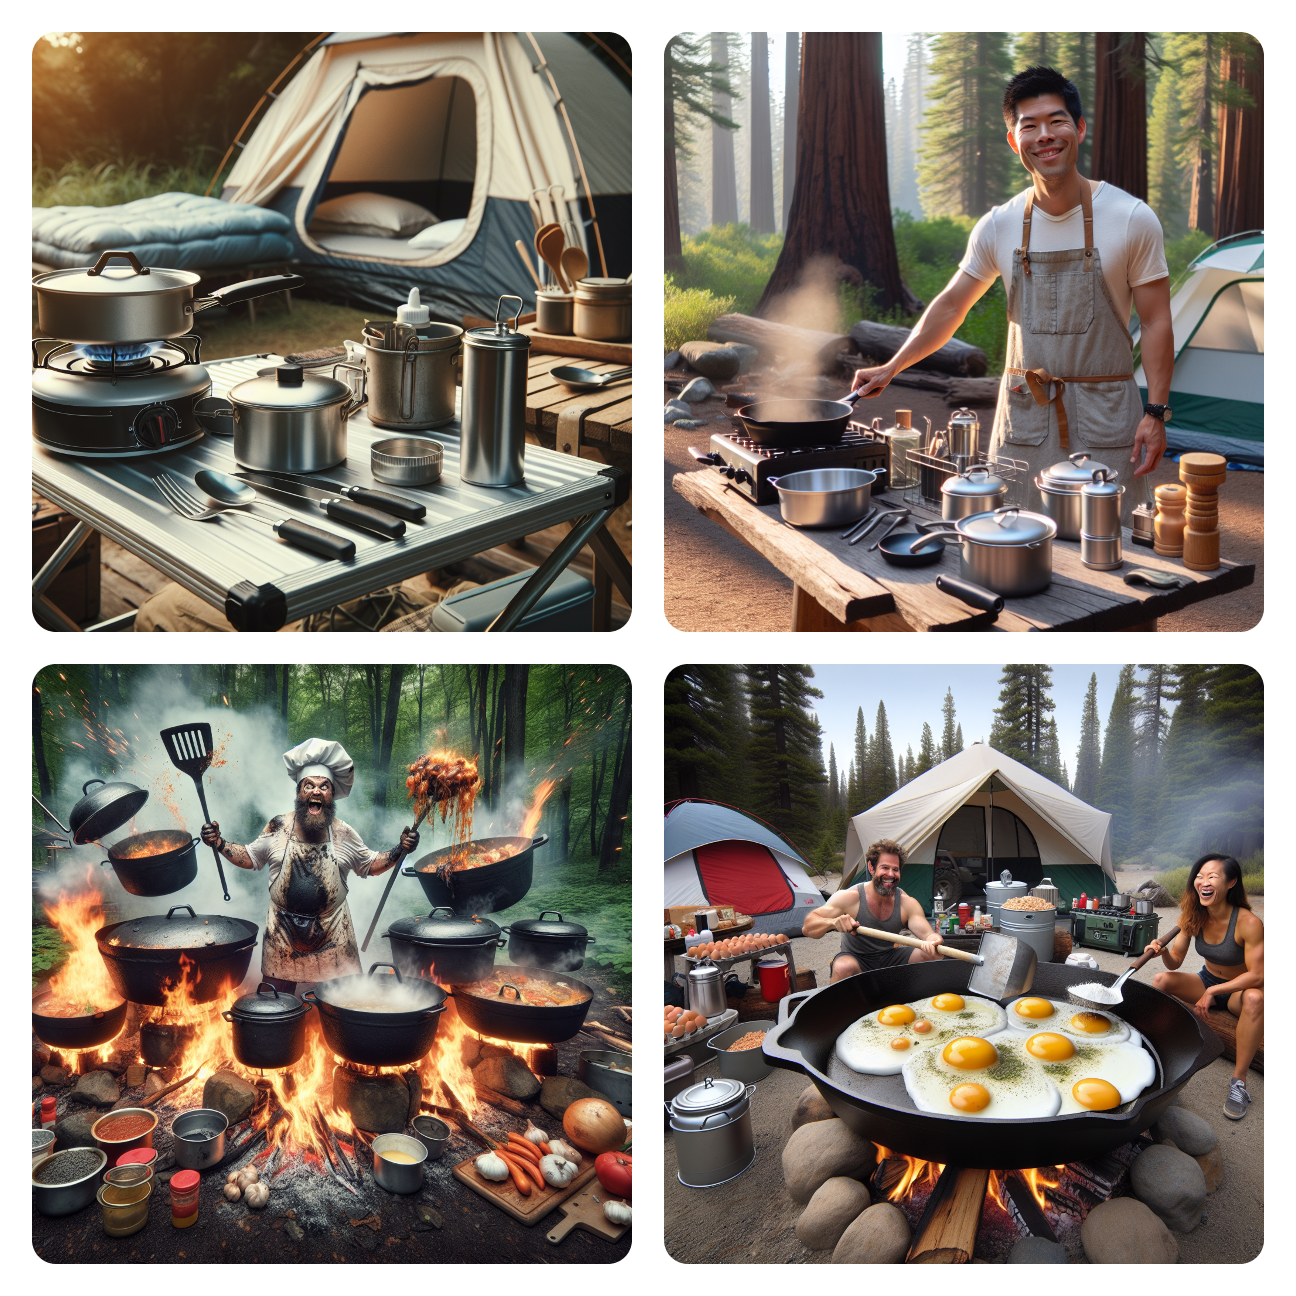 Image: The Culinary Camper: Totally Tent-typical